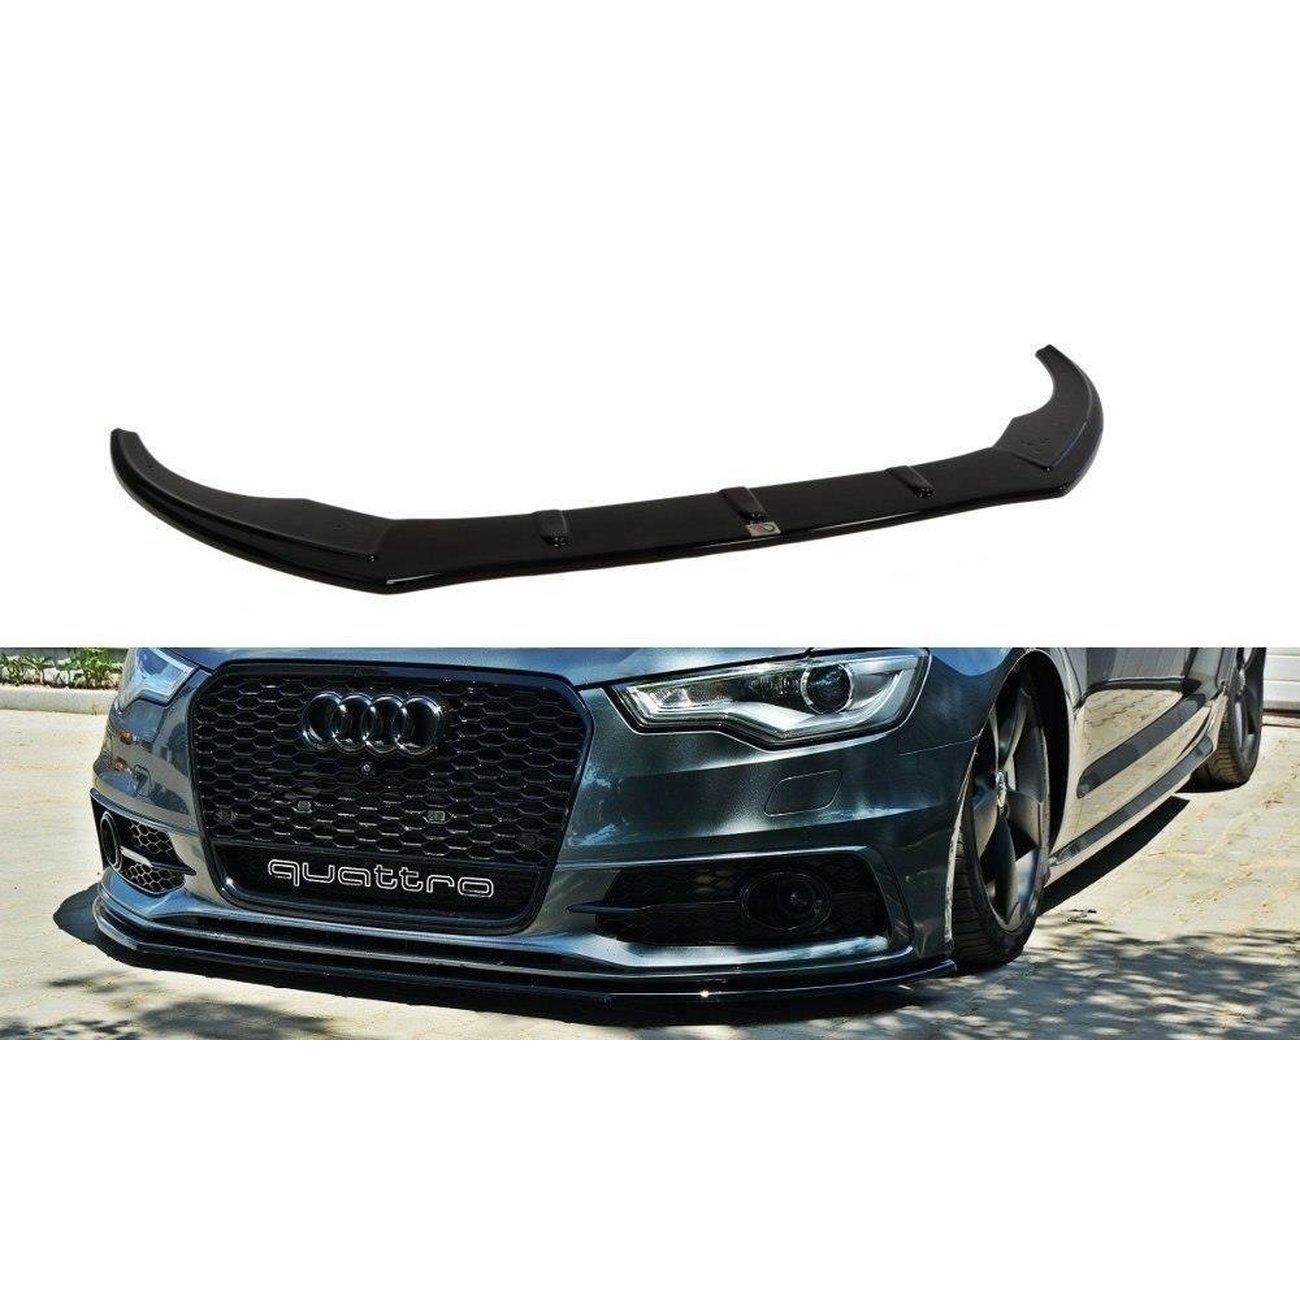 AUDI A6 4G - BODY STYLING - Swiss Tuning Onlineshop - AUDI A6 -09.2014 -  MAXTON FRONTSPOILER | FRONTLIPPE